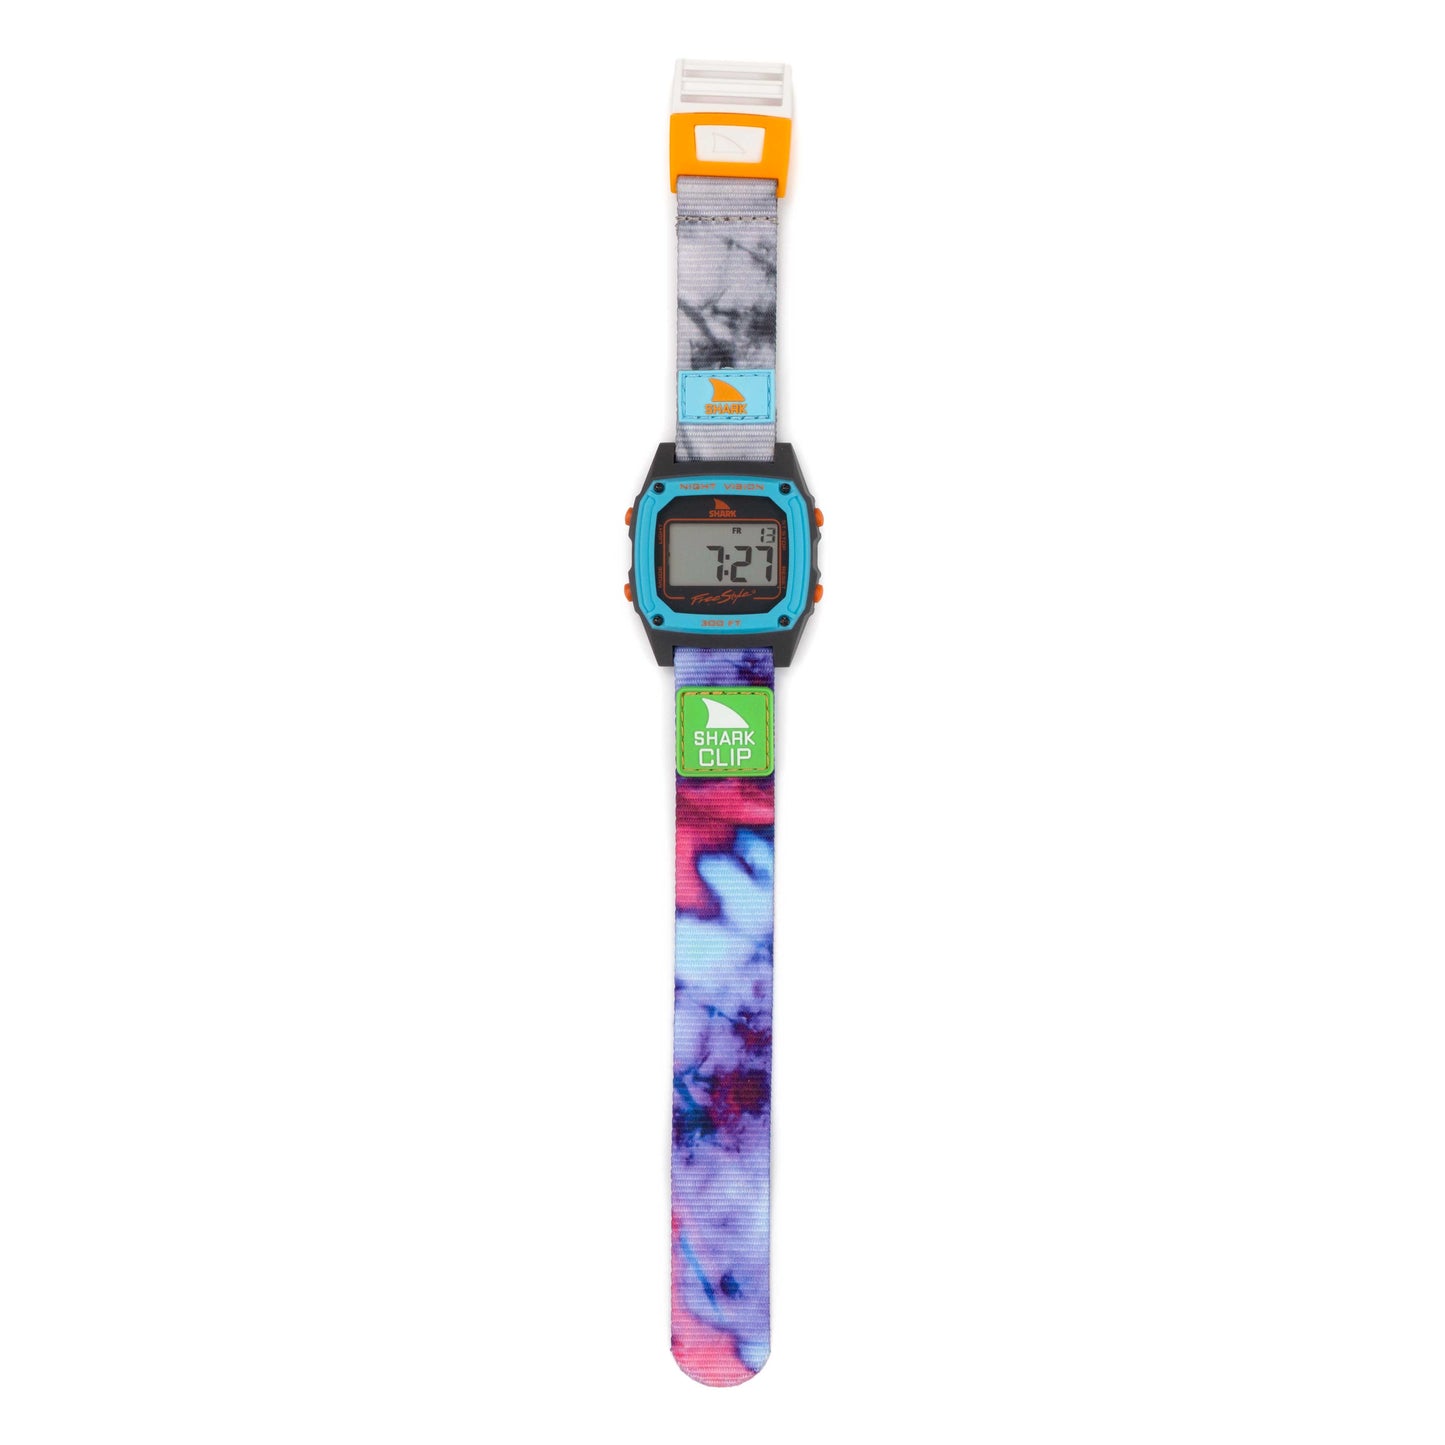 Freestyle Watches - Shark Classic Clip Tie Dye Magenta Blue